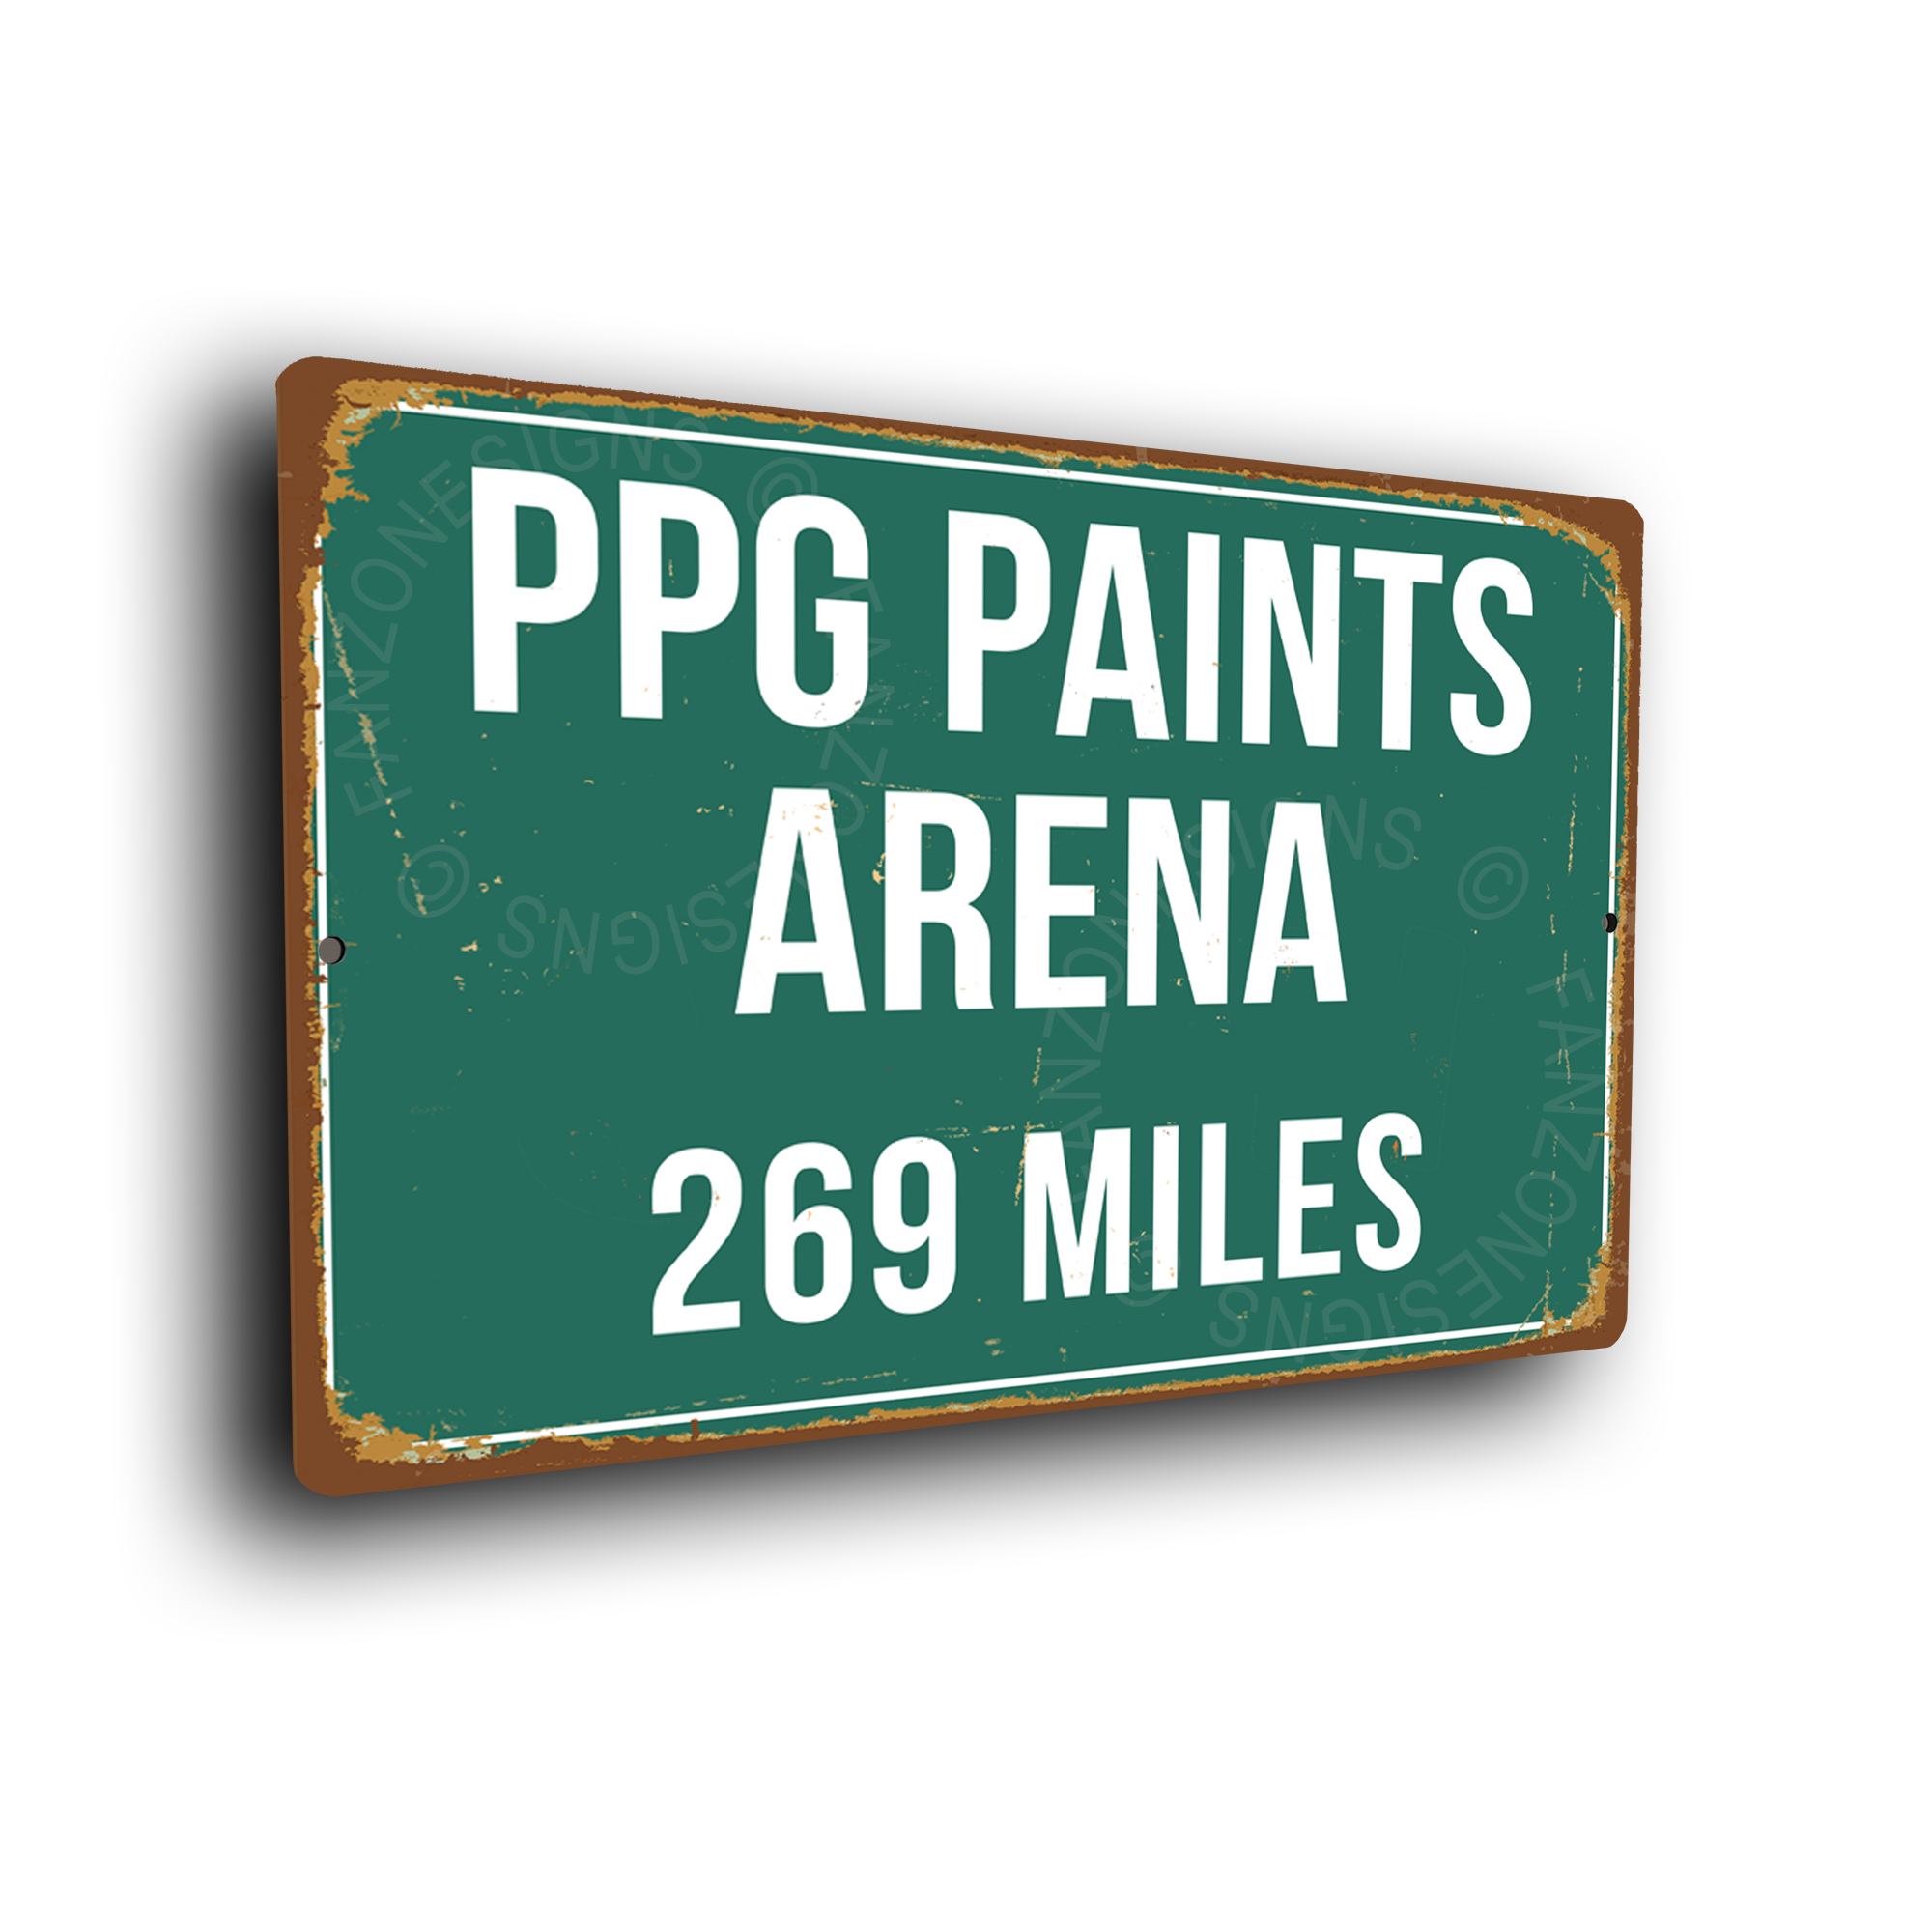 PPG Paints Arena Signs